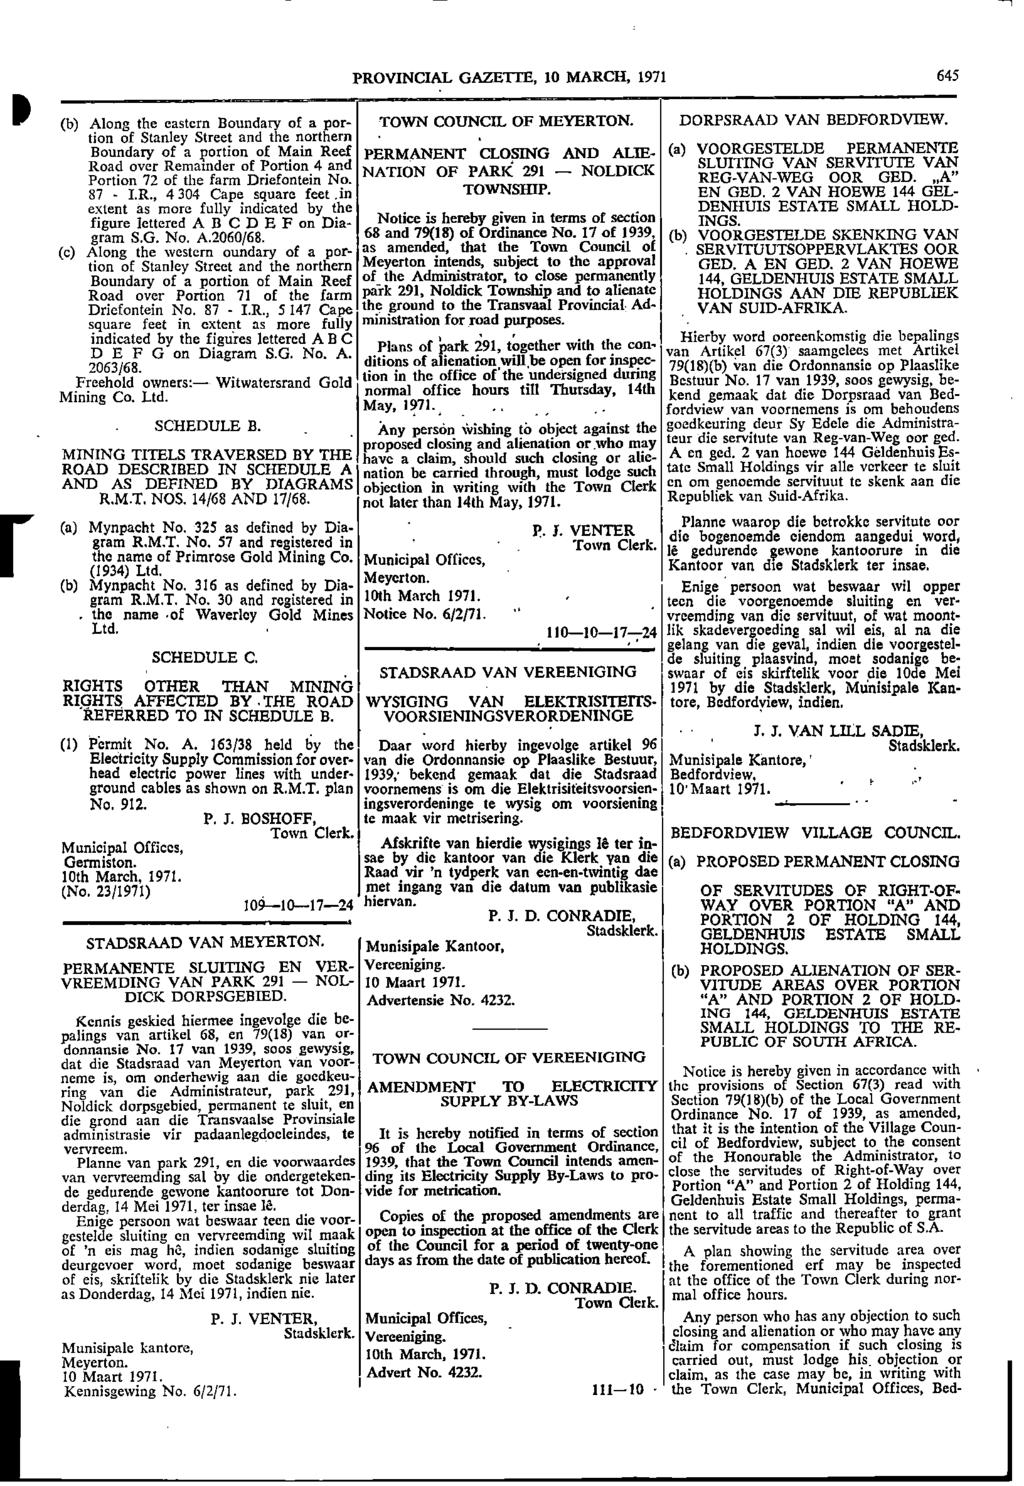 PROVINCIAL GAZETTE 10 MARCH 1971 645 0 (b) Along the eastern Boundary of a por TOWN COUNCIL OF MEYERTON DORPSRAAD VAN BEDFORDVIEW don of Stanley Street and the northern Boundary of a portion of Main